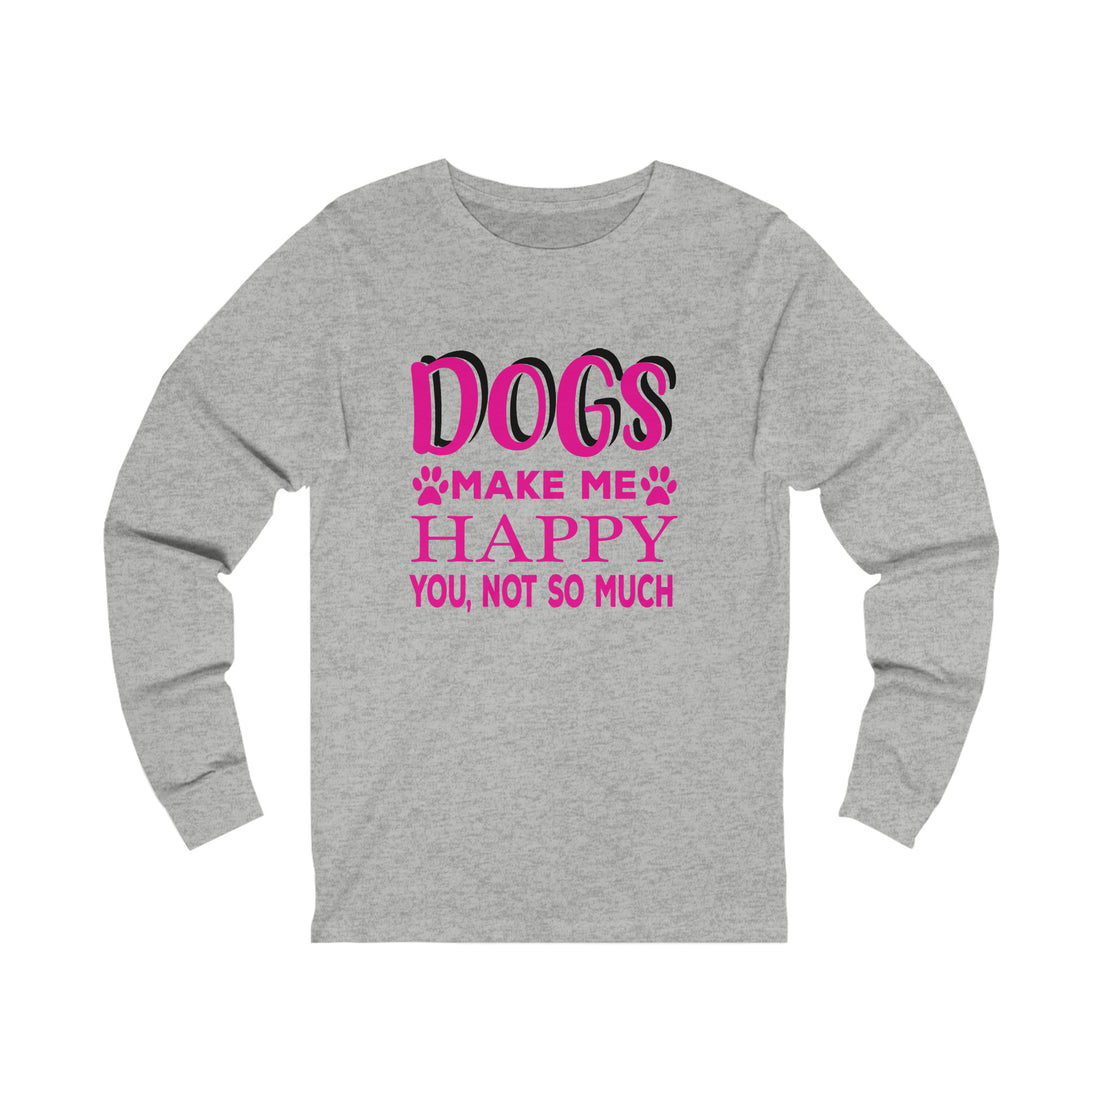 Dogs Make Me Happy You Not So Much - Unisex Jersey Long Sleeve Tee